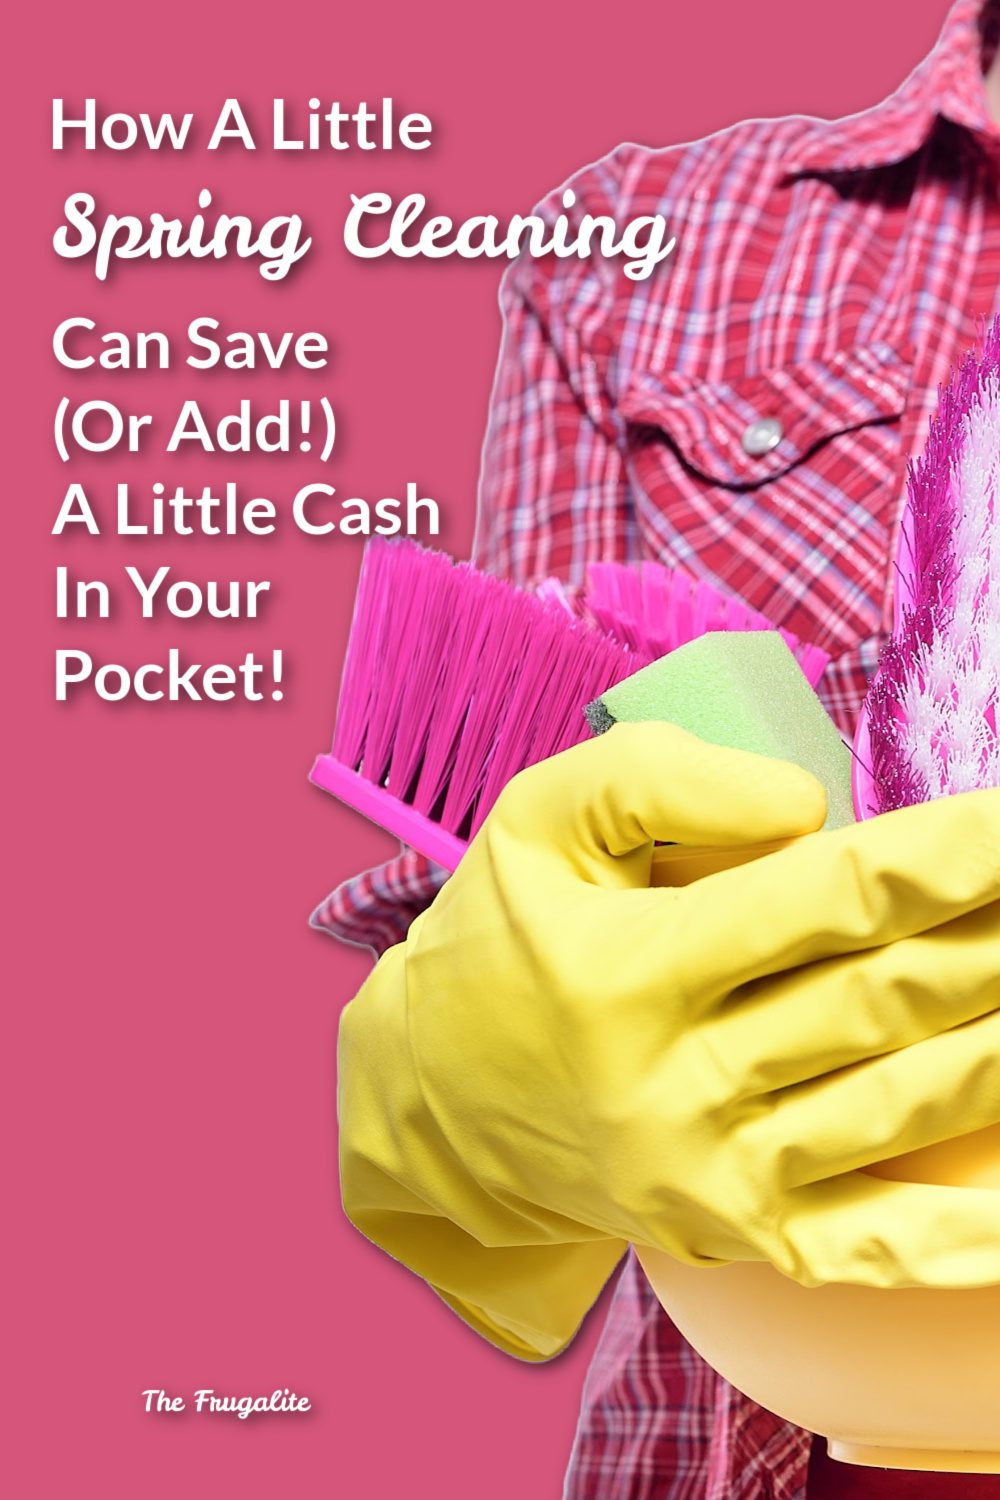 How A Little Spring Cleaning Can Save (Or Add!) A Little Cash In Your Pocket!